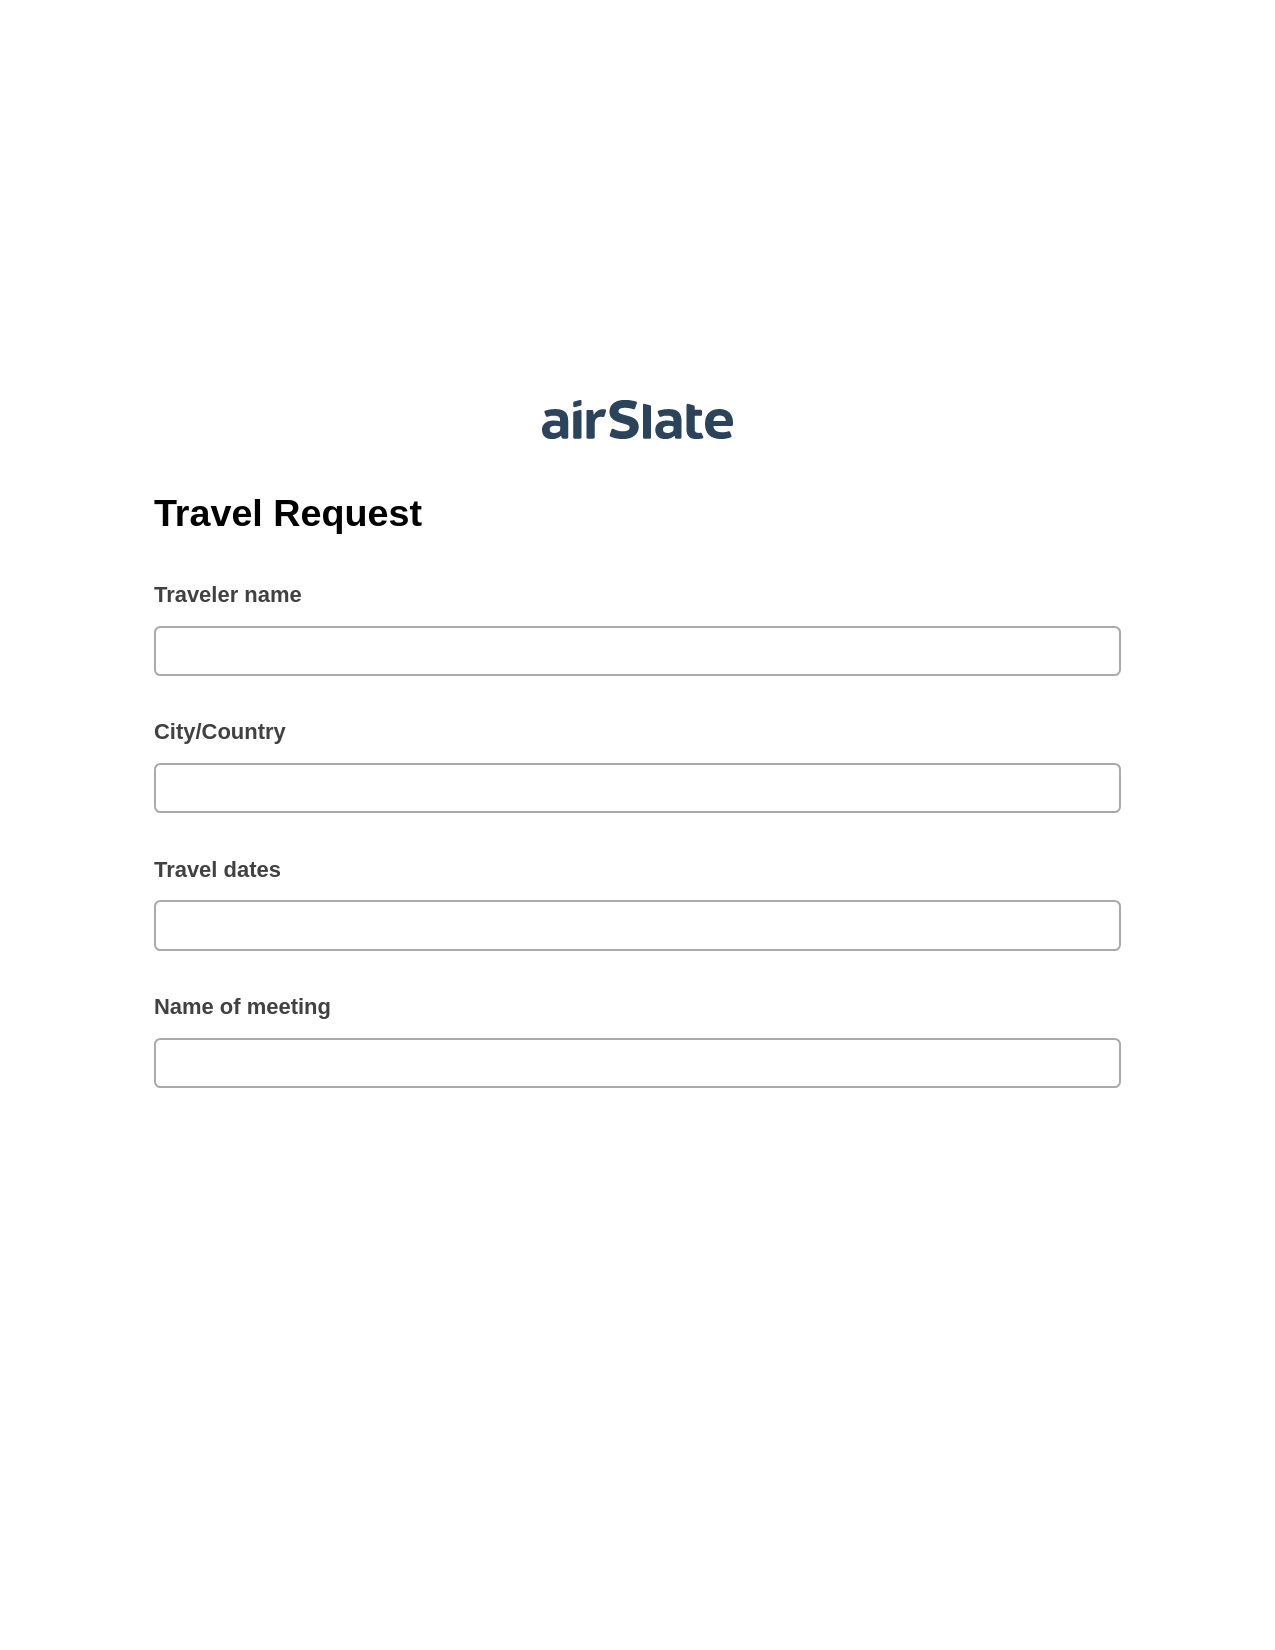 Multirole Travel Request Pre-fill Slate from MS Dynamics 365 Records Bot, Unassign Role Bot, Export to Google Sheet Bot